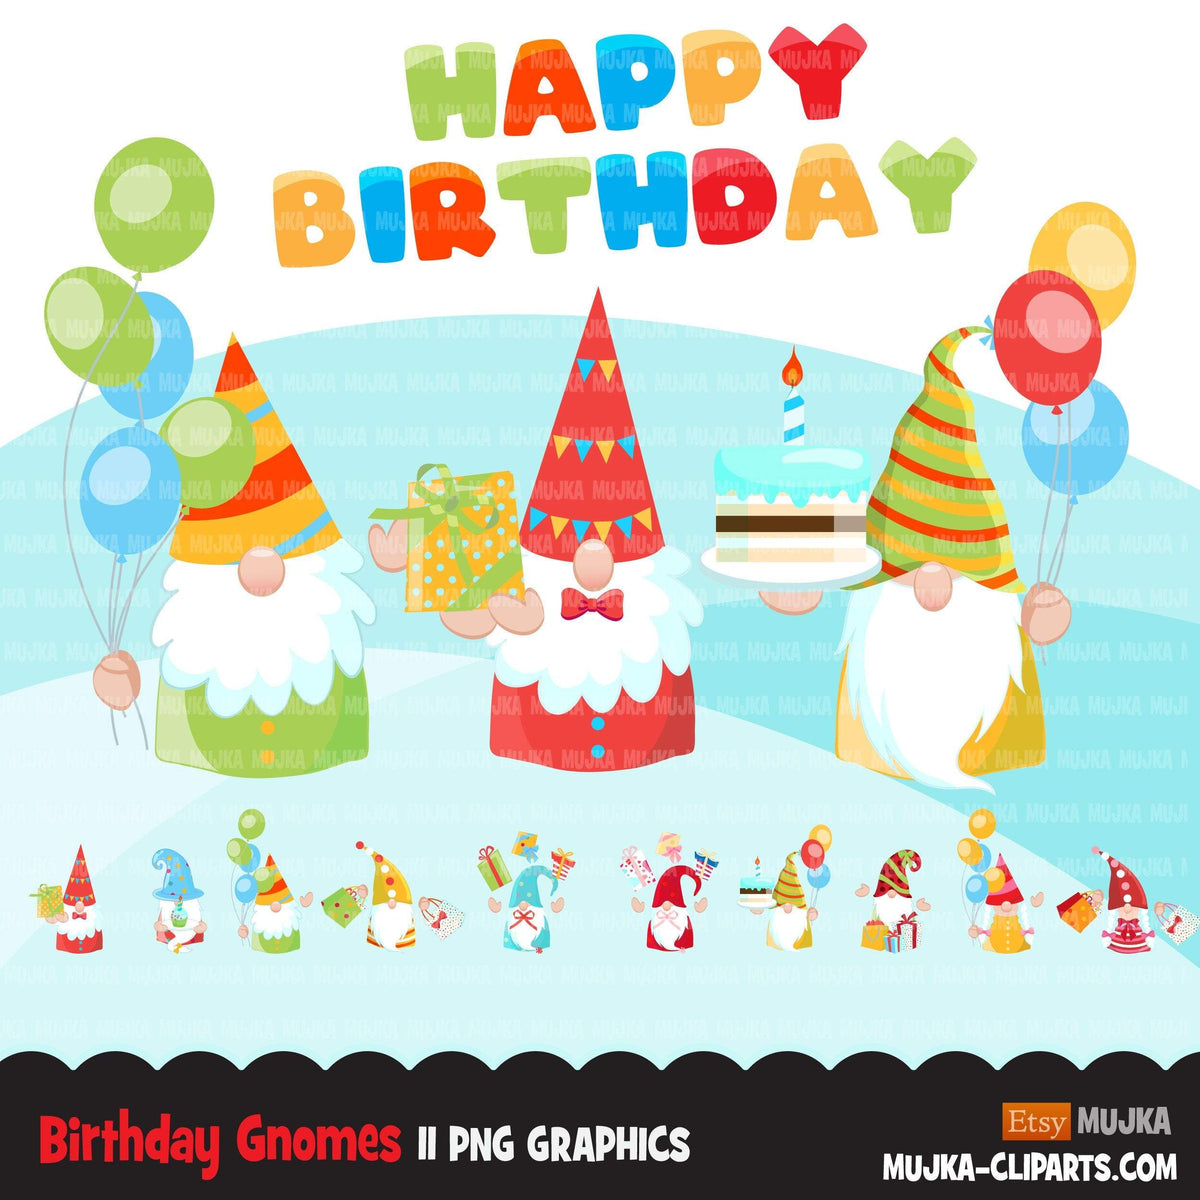 Download Birthday gnomes Clipart, birthday graphics, colorful party ...